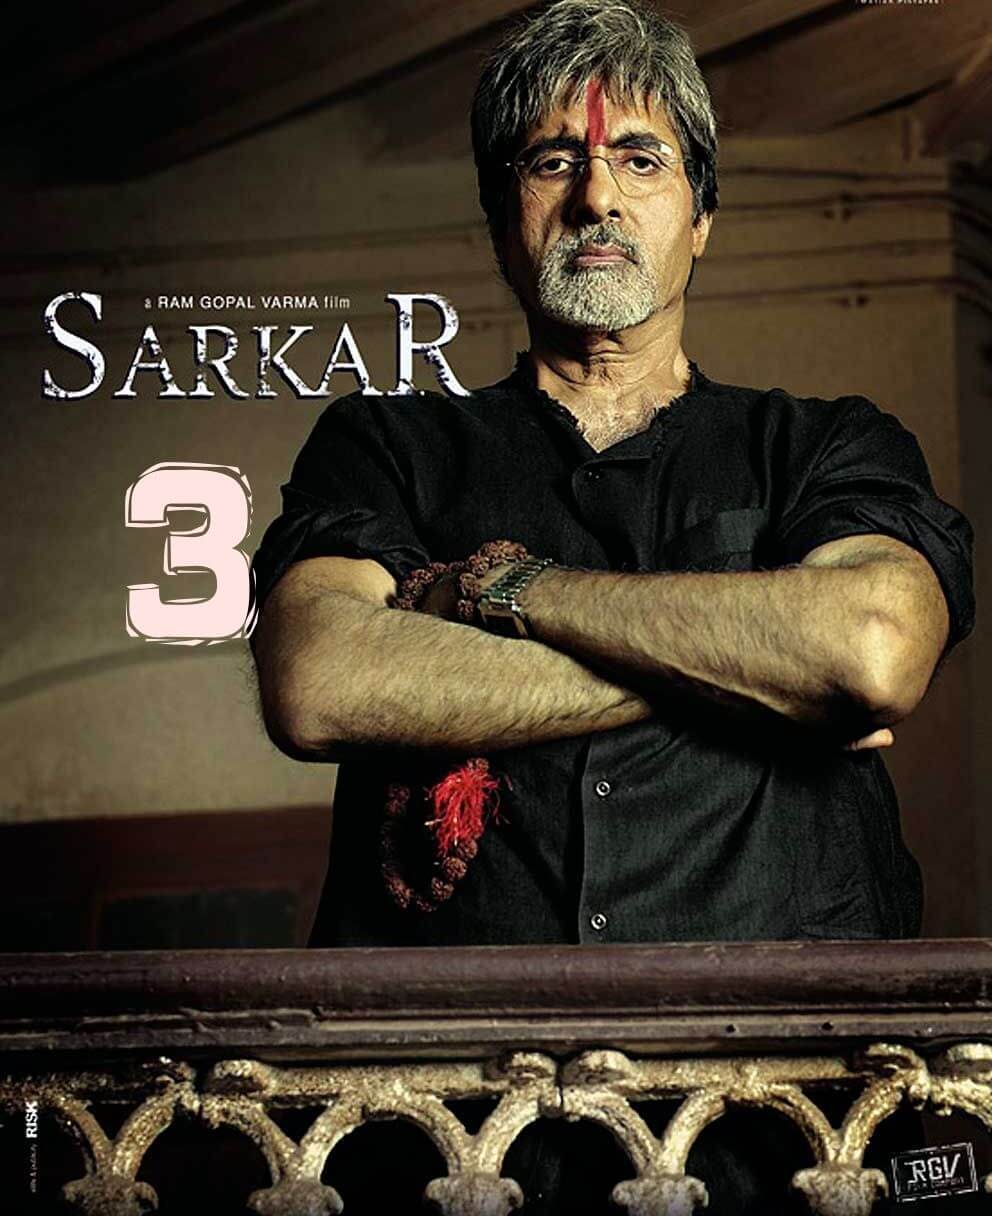 Sarkar 3 2017 Full Movie Watch and Download free 720p - SBR MOVIES